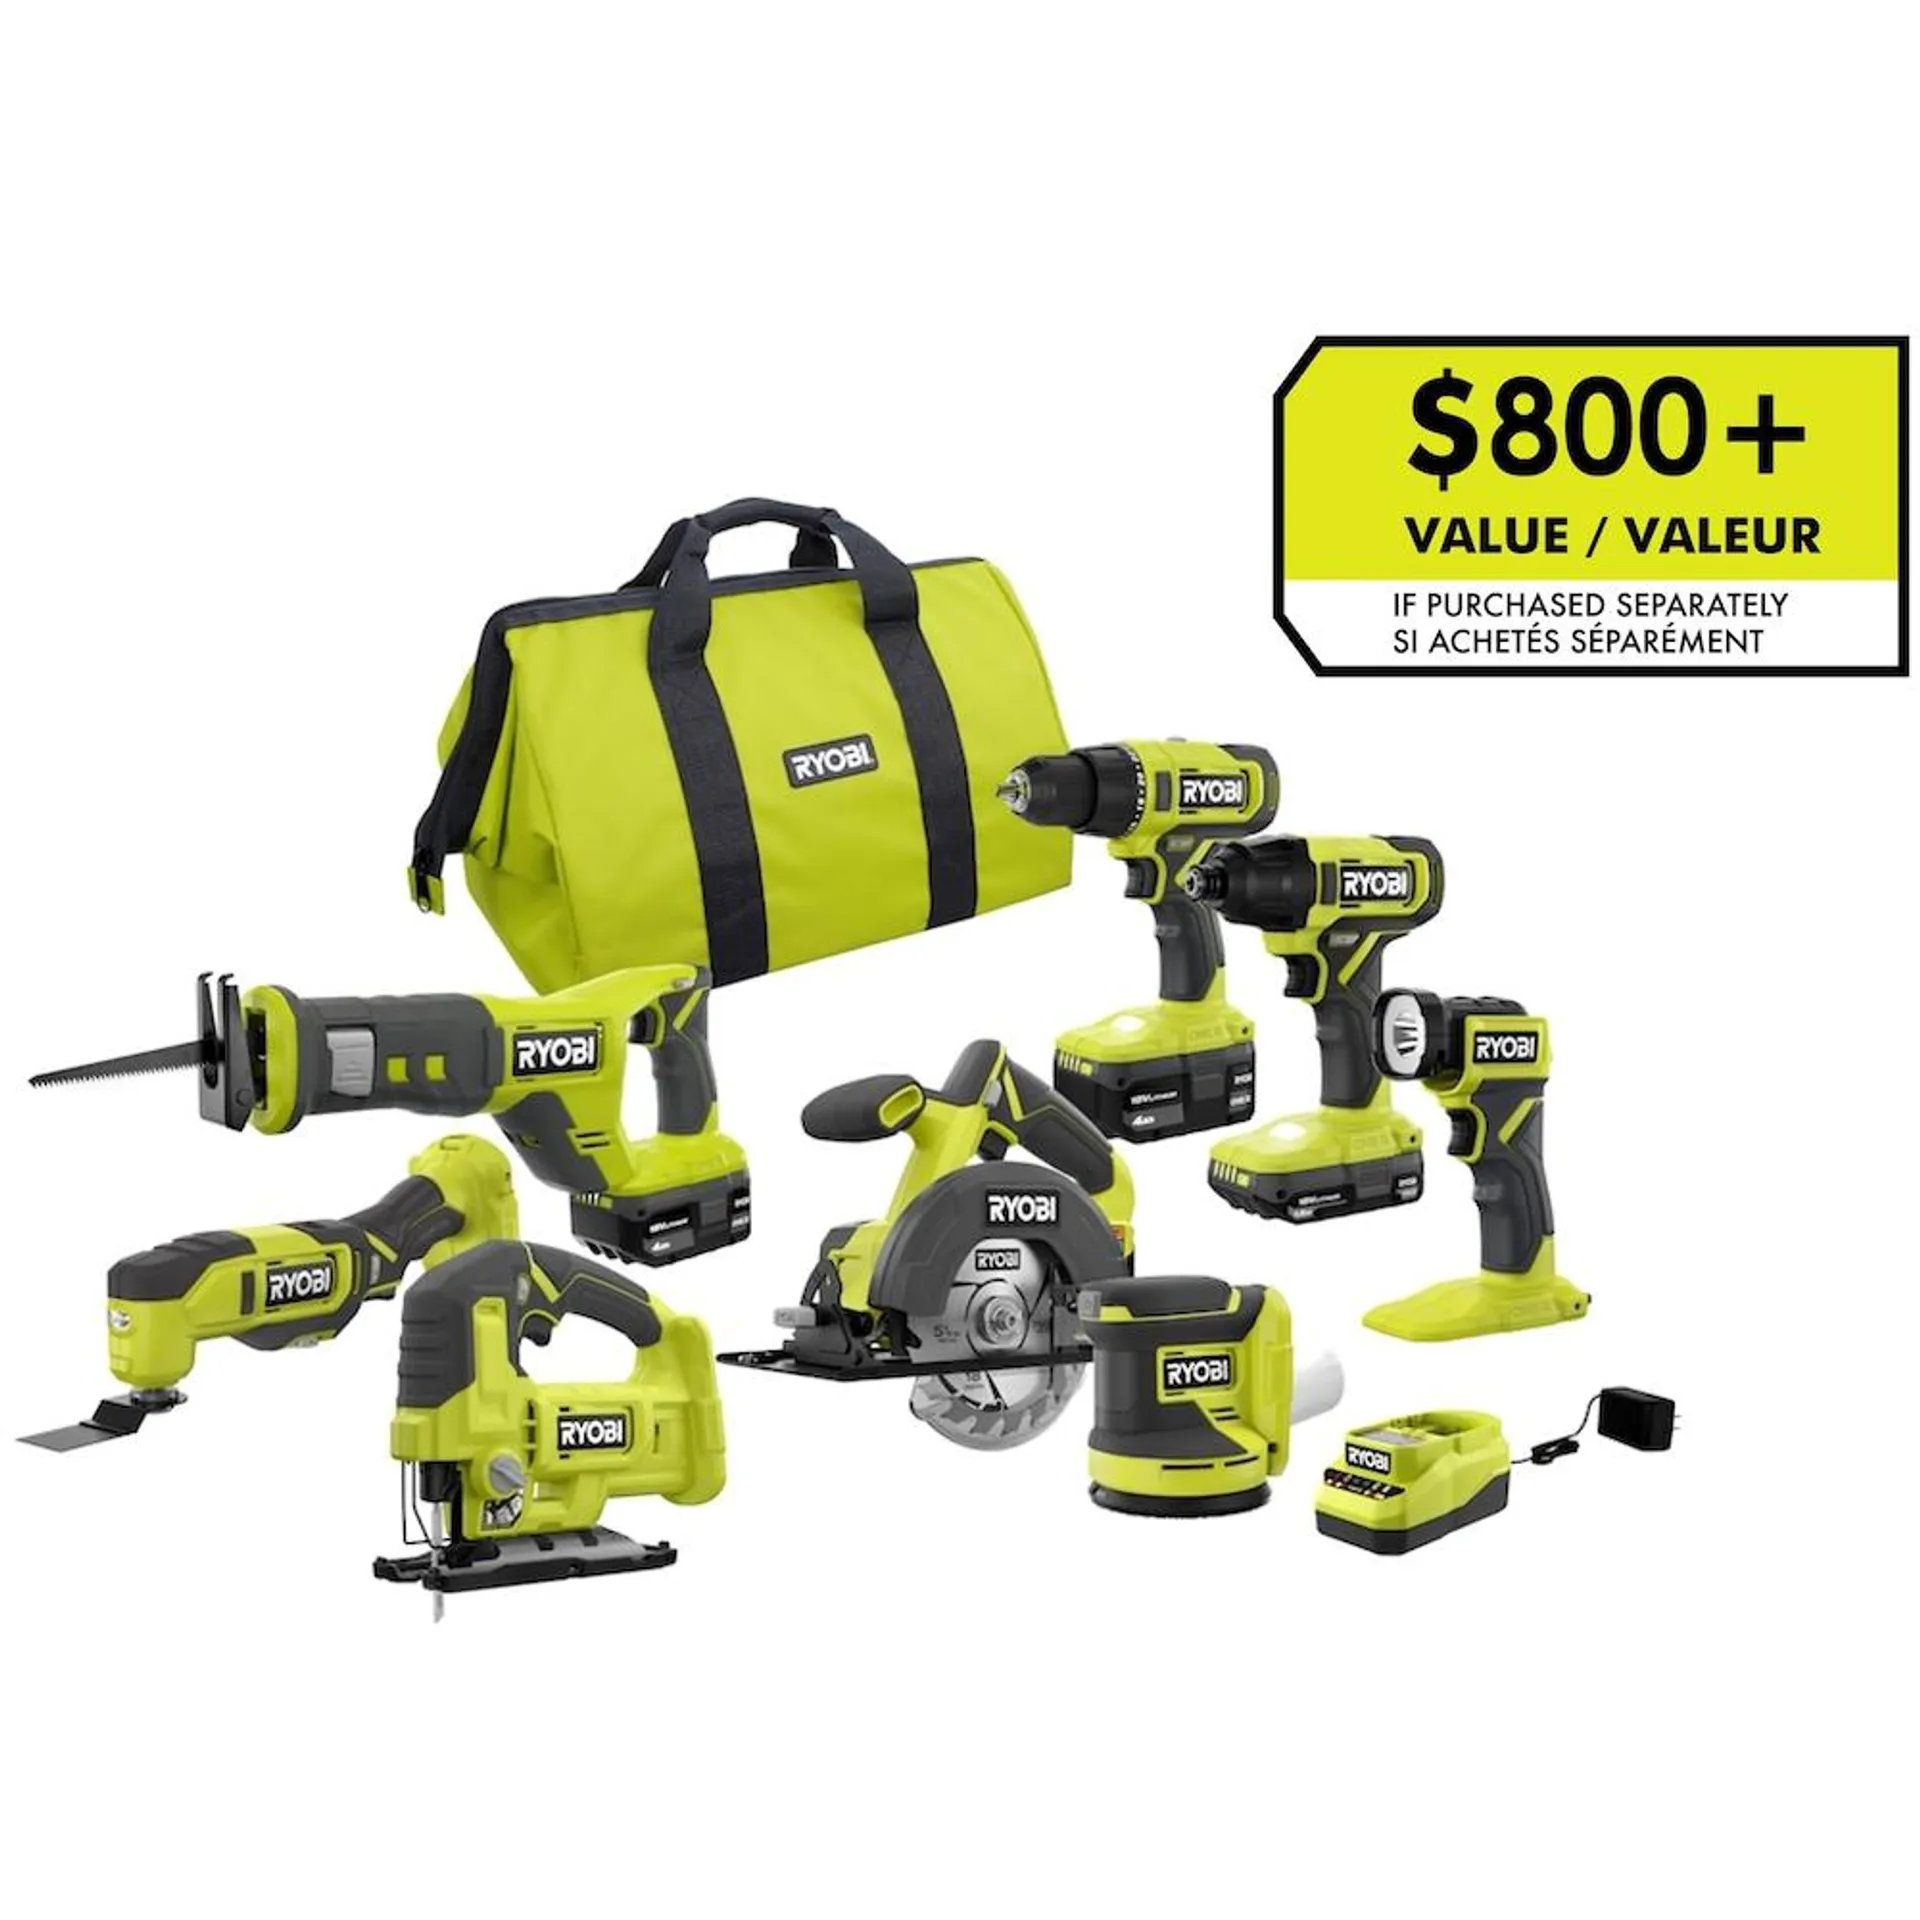 18V ONE+ Cordless Lithium-Ion 8-Tool Kit with (1) 1.5 Ah and (2) 4.0 Ah Batteries and Charger